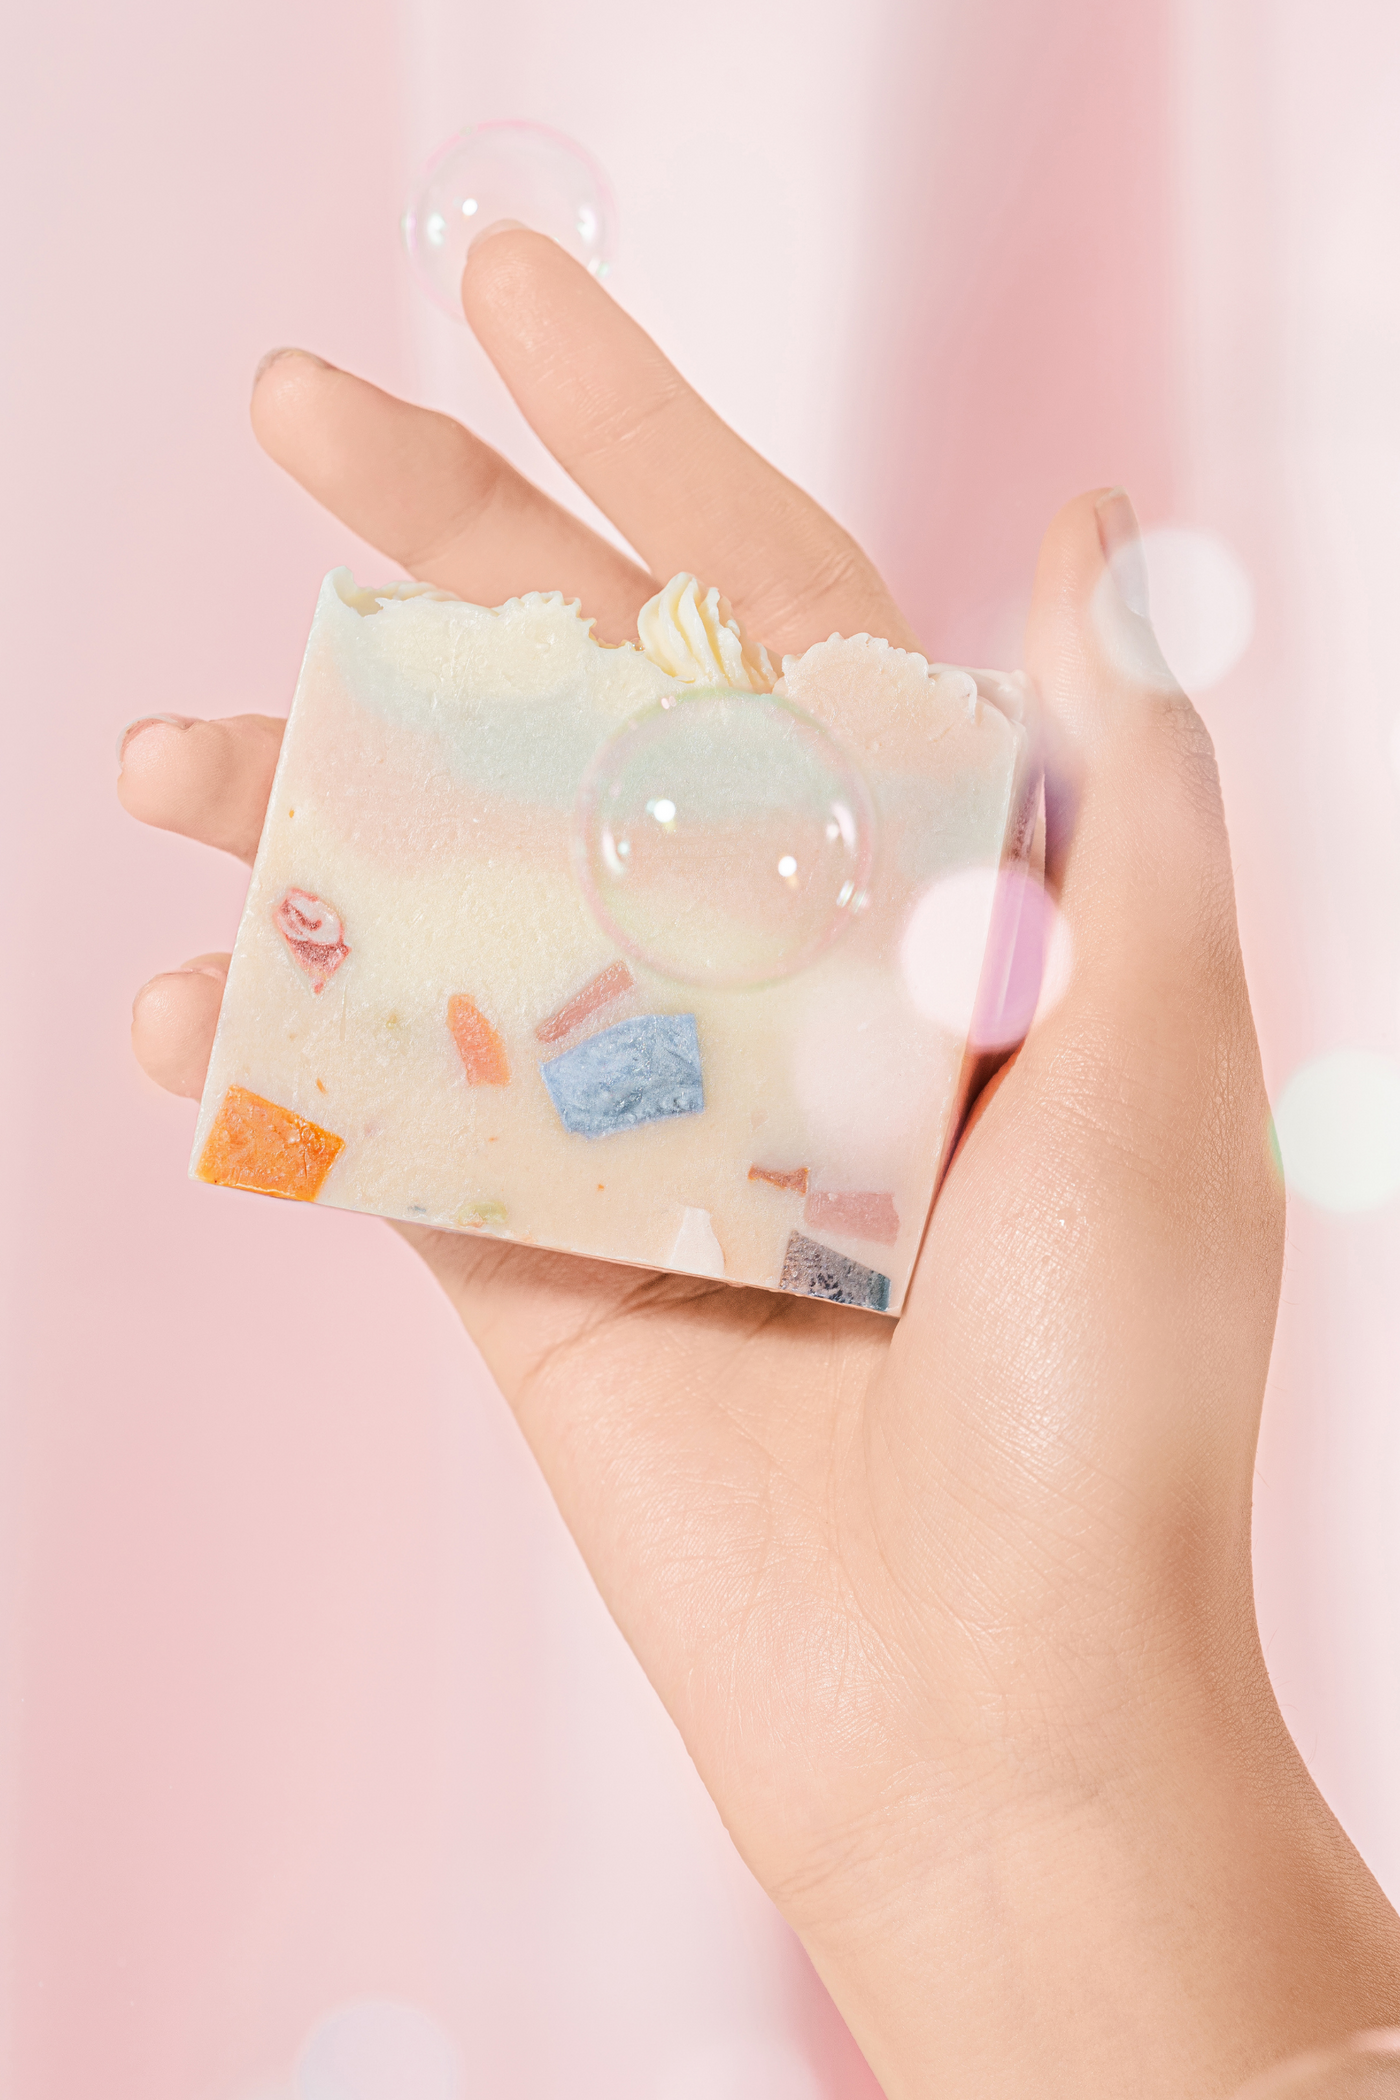 Gentle Mood Celebratory Mood Bar, available on ZERRIN with free Singapore shipping